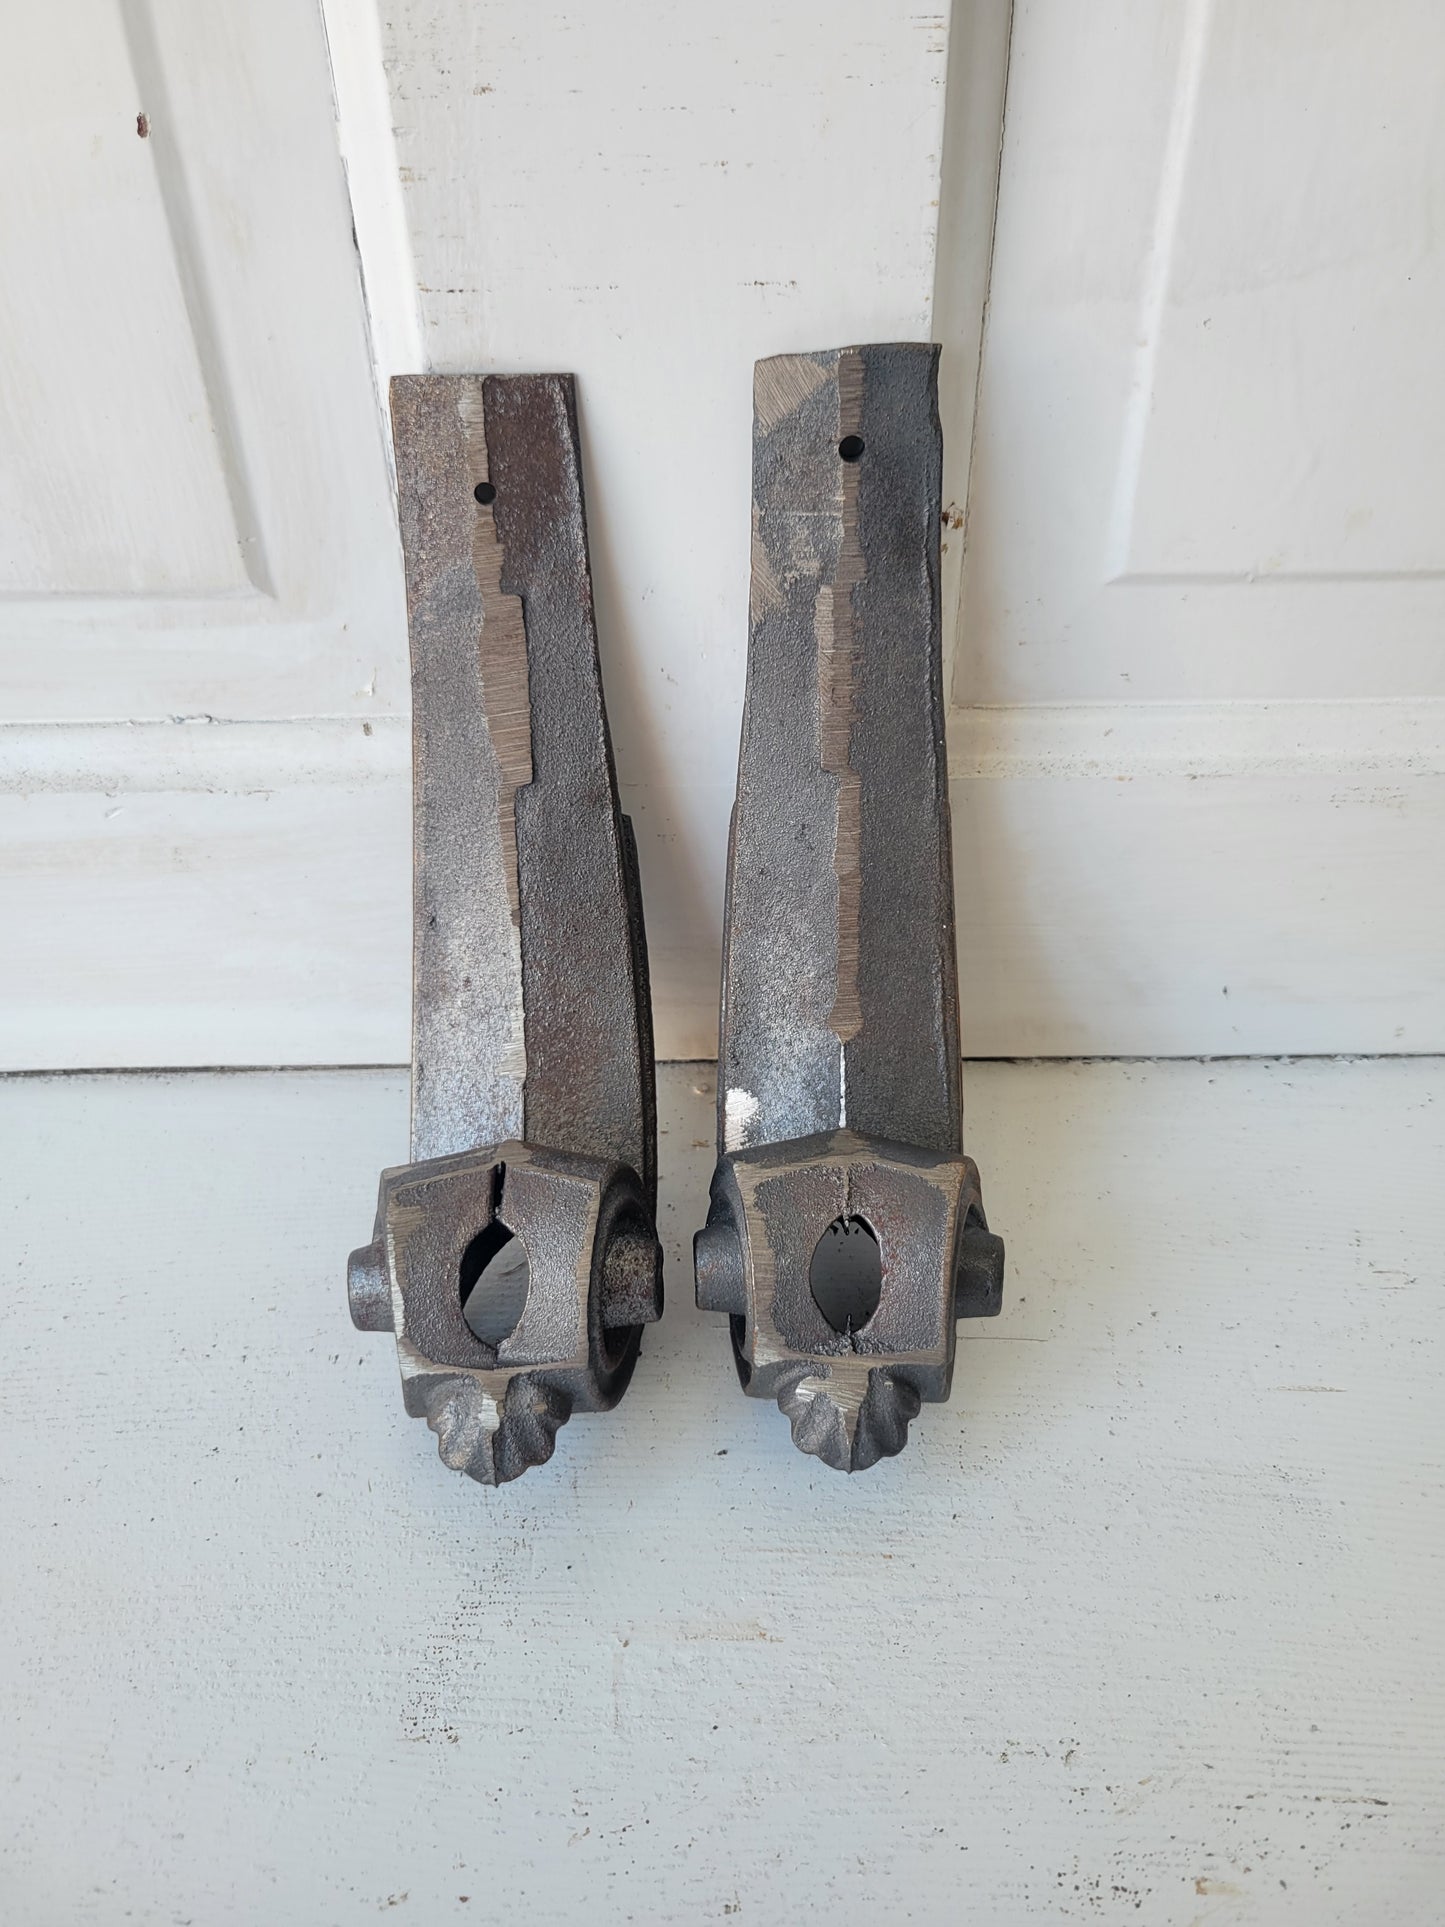 Pair of Architectural Detail Scroll Hooks, Large Iron Scroll Design Wall Hooks